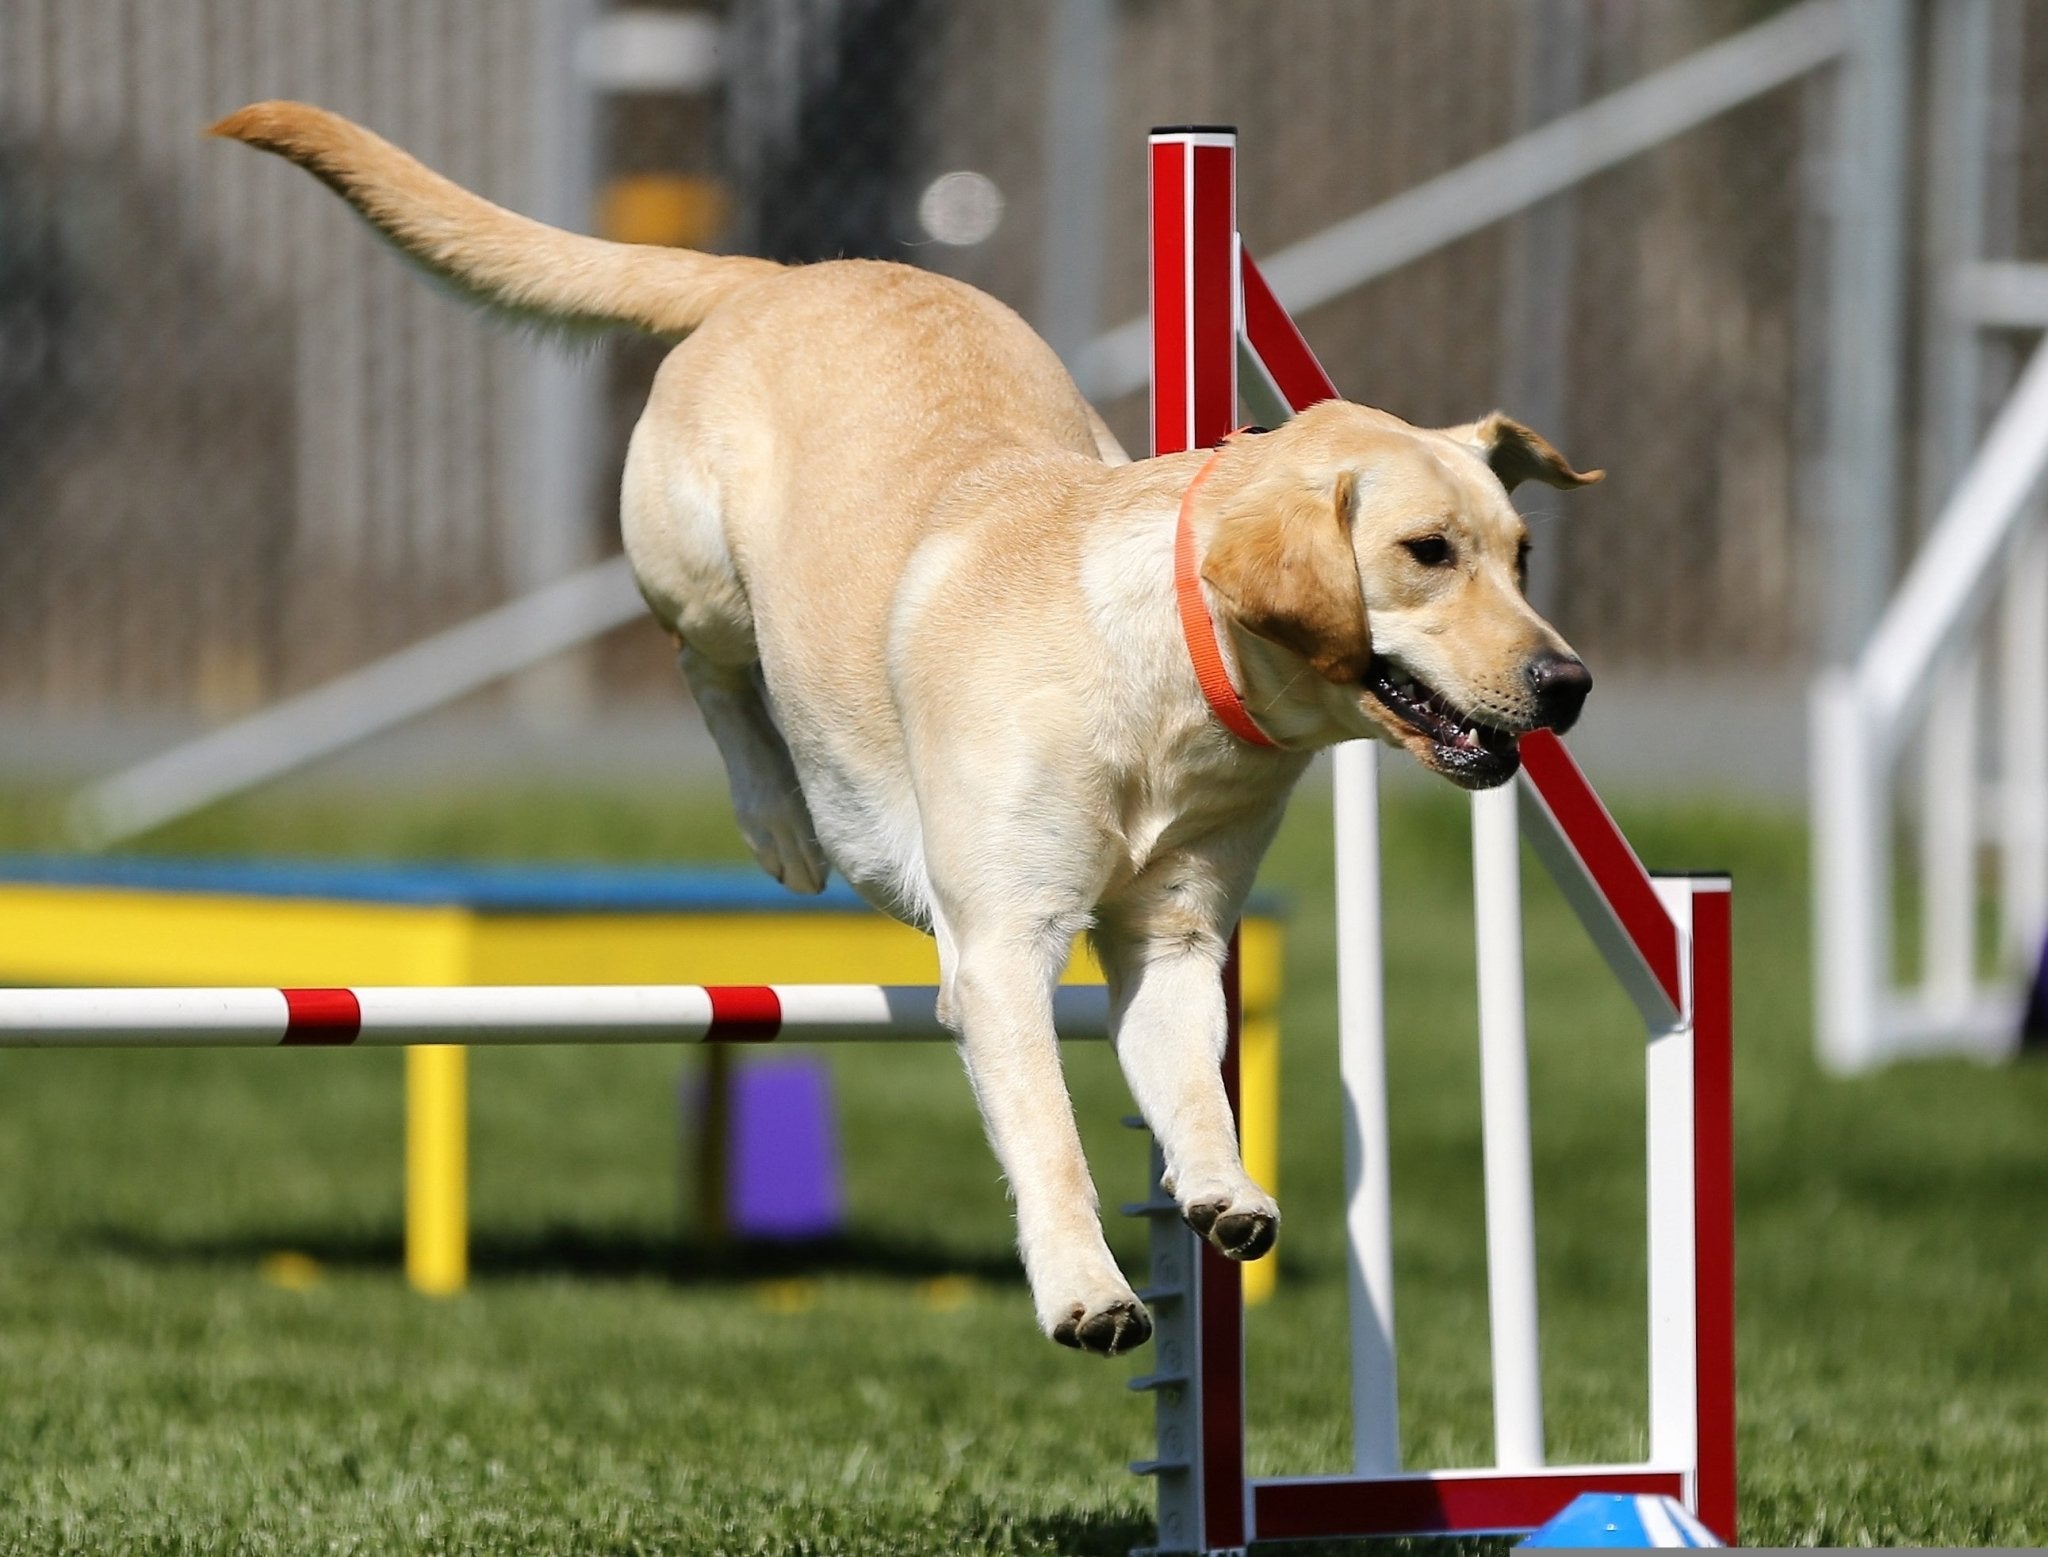 Get Your Dog Moving: How to Design a Fun and Unique Agility Course